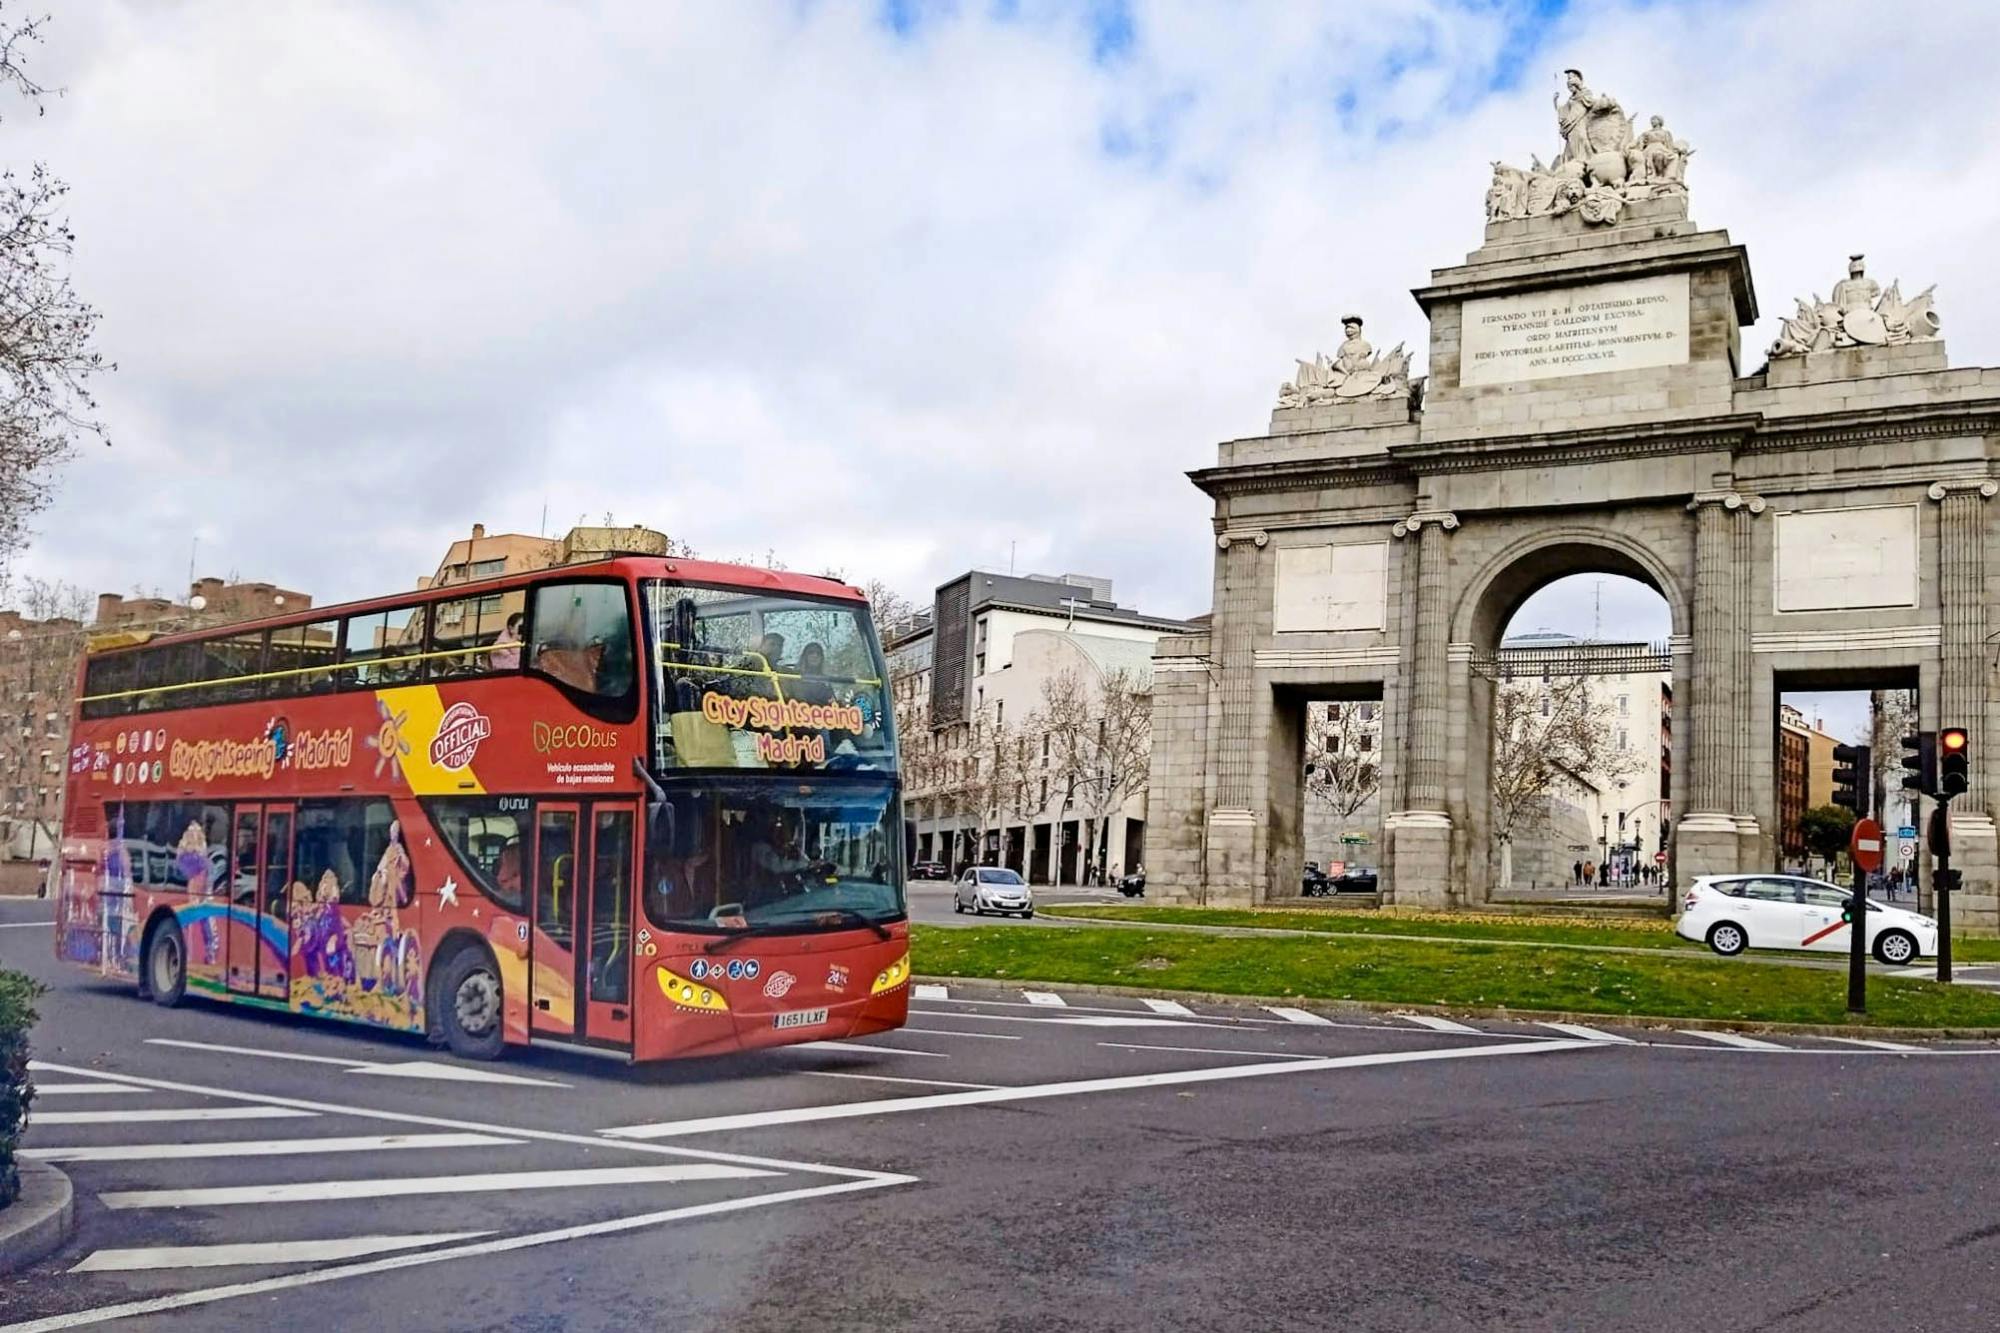 Tour to Toledo from Madrid with City Sightseeing Hop-on-Hop-off Bus